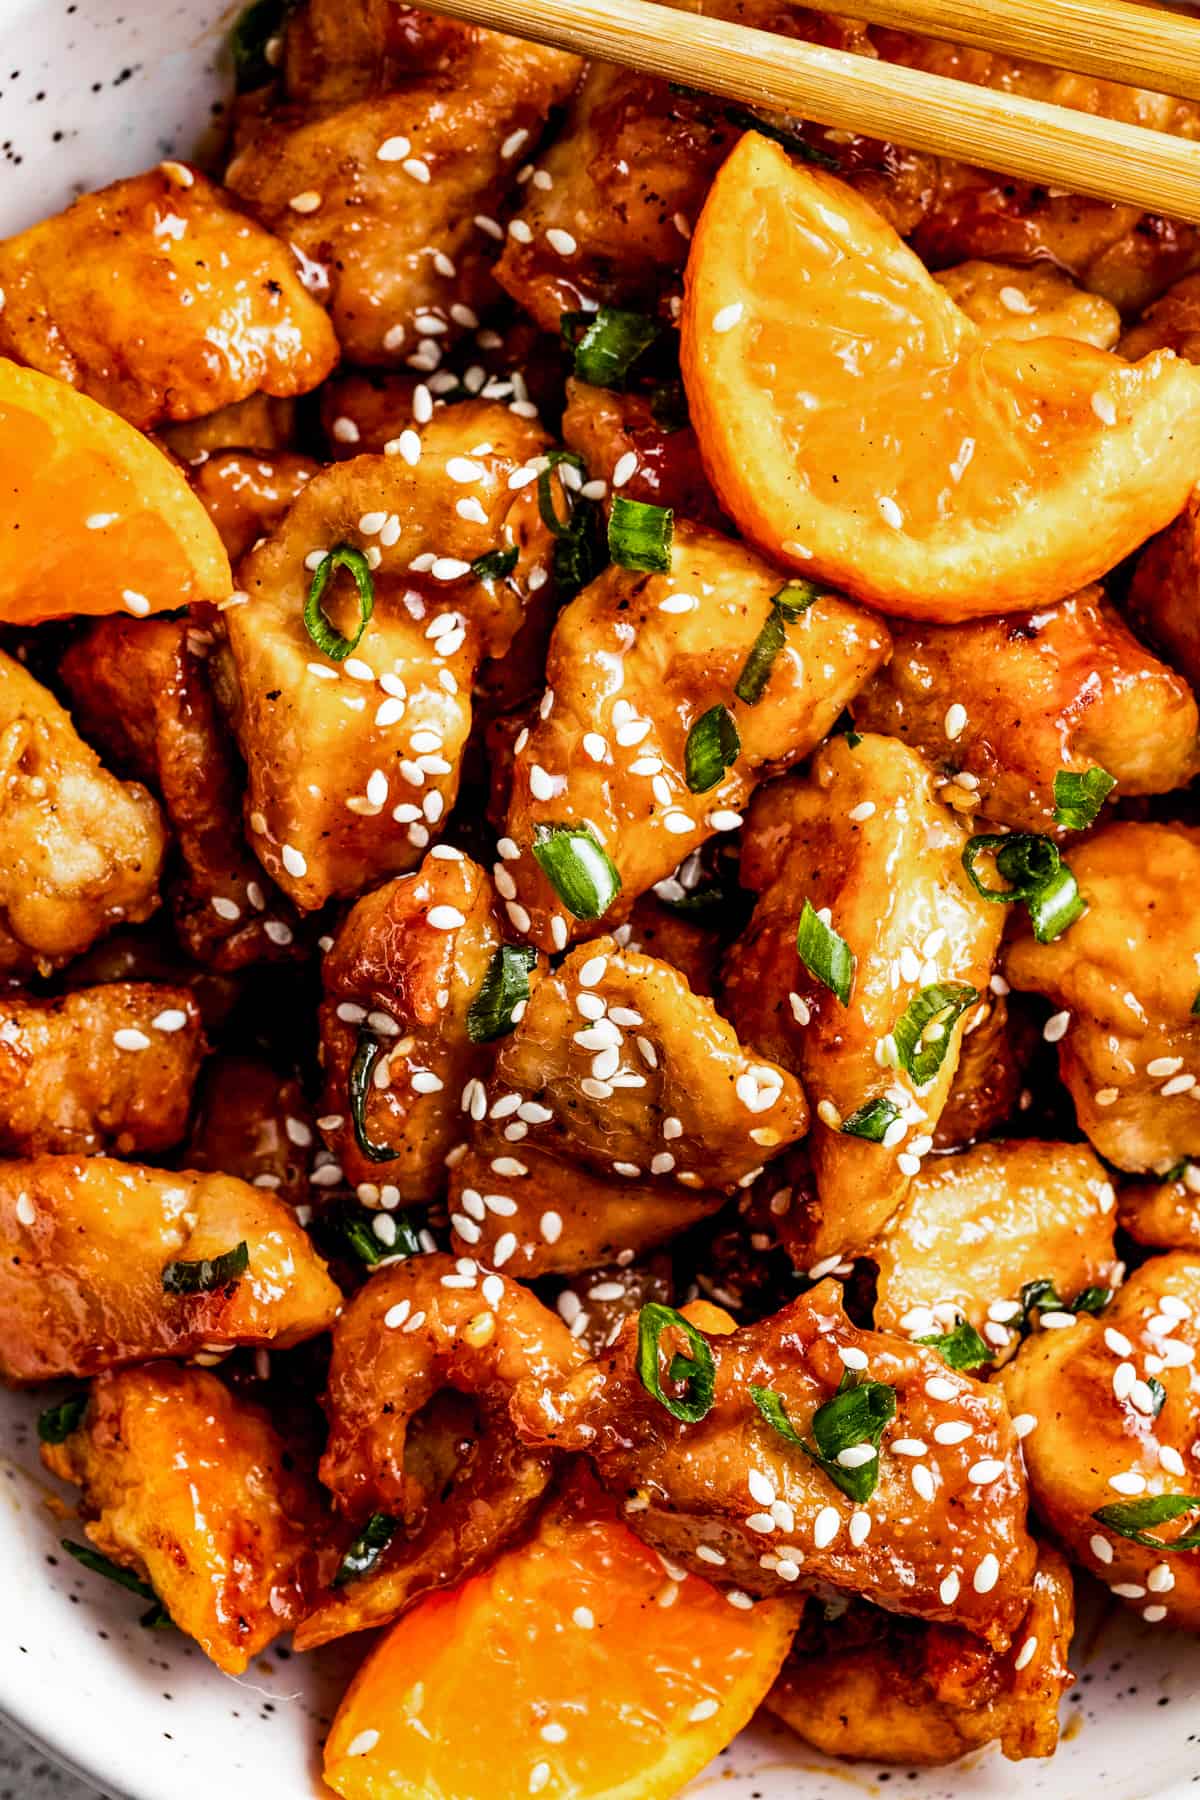 up close shot of mandarin chicken in a bowl, garnished with orange slices, green onions, and sesame seeds.